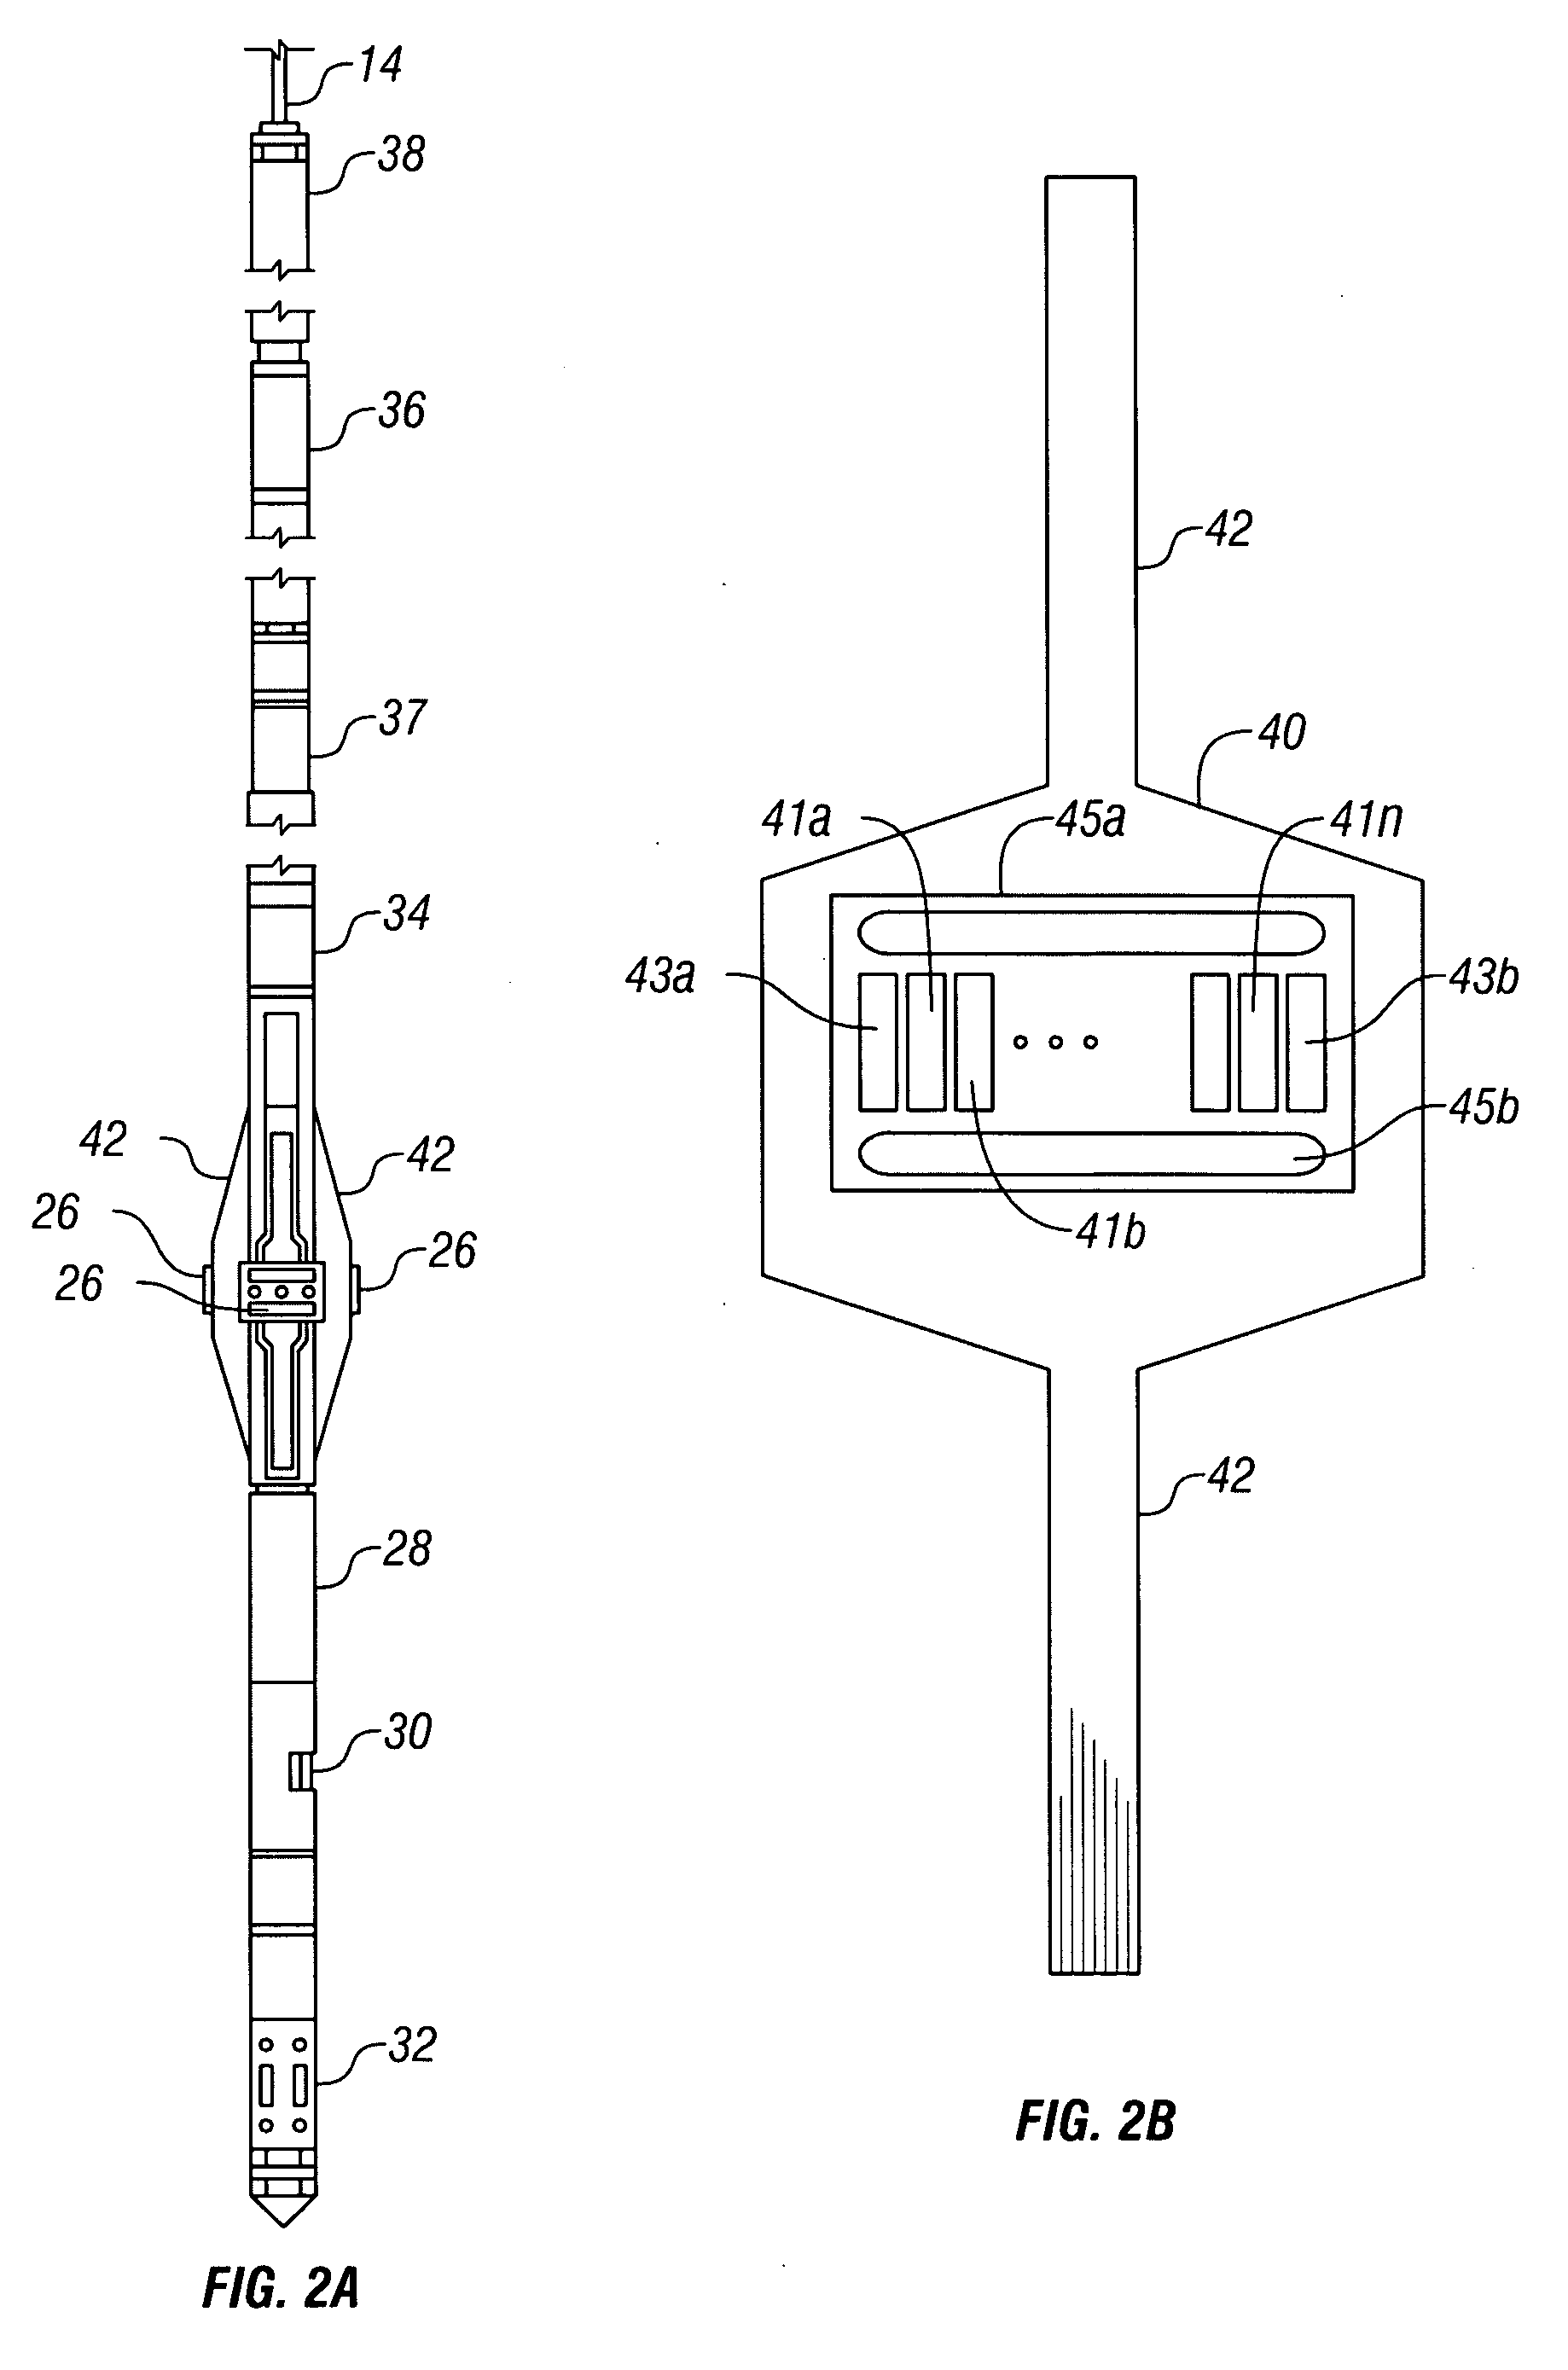 Method and apparatus for borehole wall resistivity imaging in the presence of conductive mud and rugose borehole